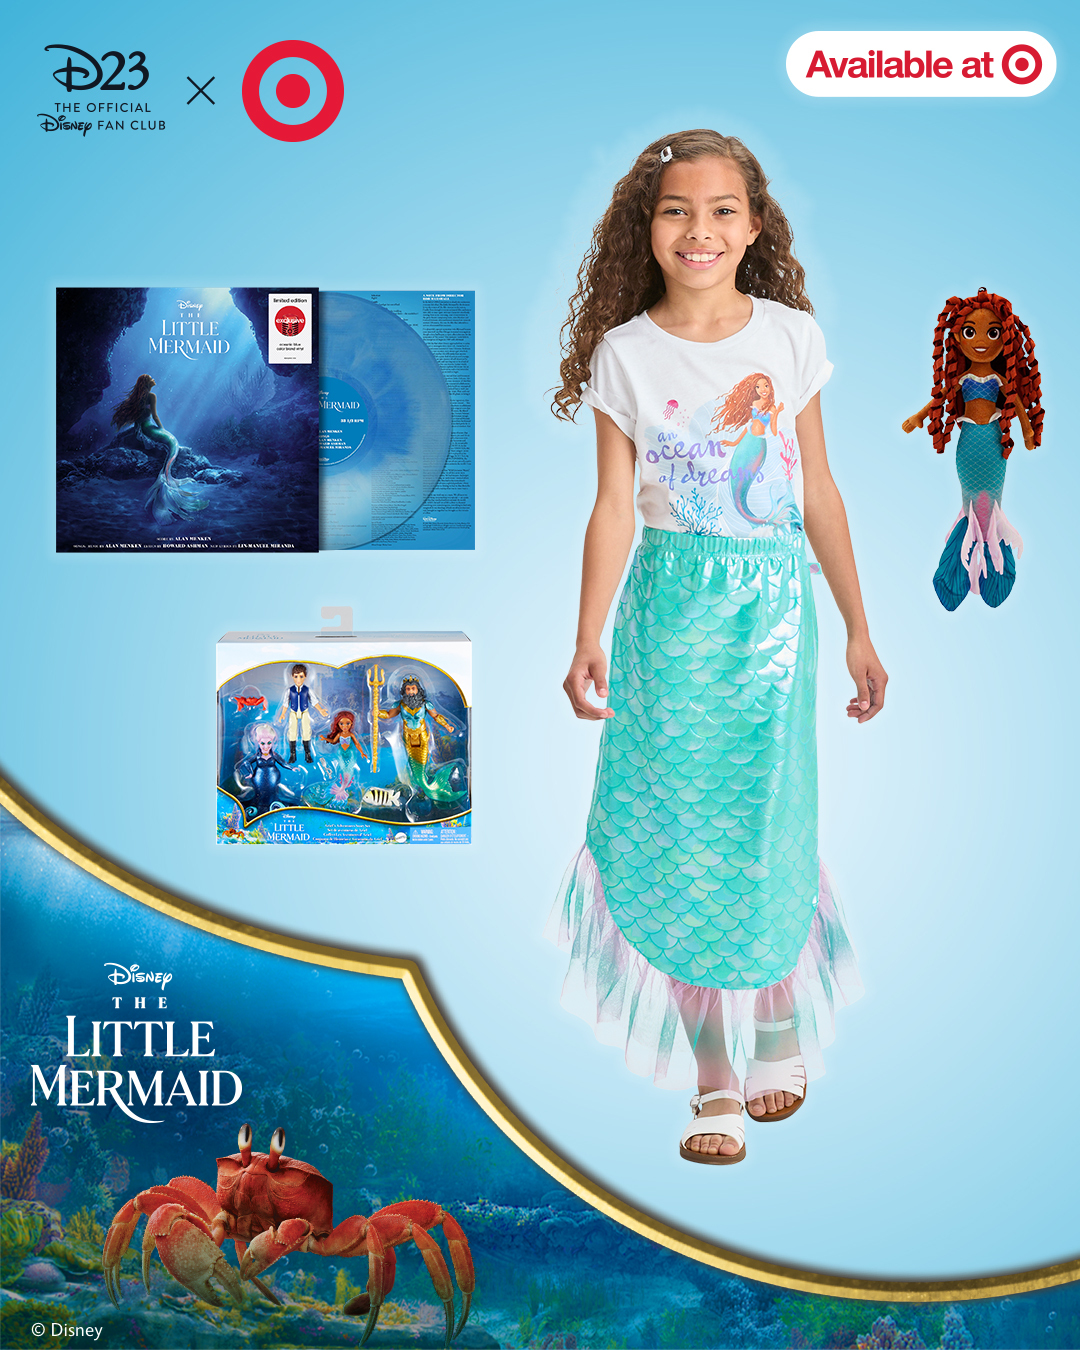 An image of the D23: The Official Disney Fan Club and Target collection of merchandise. Set against a light blue background are images of Target's exclusive Little Mermaid soundtrack vinyl; a young girl with dark hair wearing a Little Mermaid t-shirt and an iridescent skirt that resembles a tail; a Little Mermaid doll, with hair that matches Halle Bailey’s in the film; and a toy collection in a box, including small versions of Ursula, Prince Eric, Ariel, and King Triton. The D23 logo and “bullseye” logo for Target can be seen in the upper left corner, and the Little Mermaid logo can be seen in the lower left. In the upper right, a small graphic says “Available at” with another small “bullseye” logo. At the very bottom of the image, against a white background, are the words “Target Collection, Explore Now.”